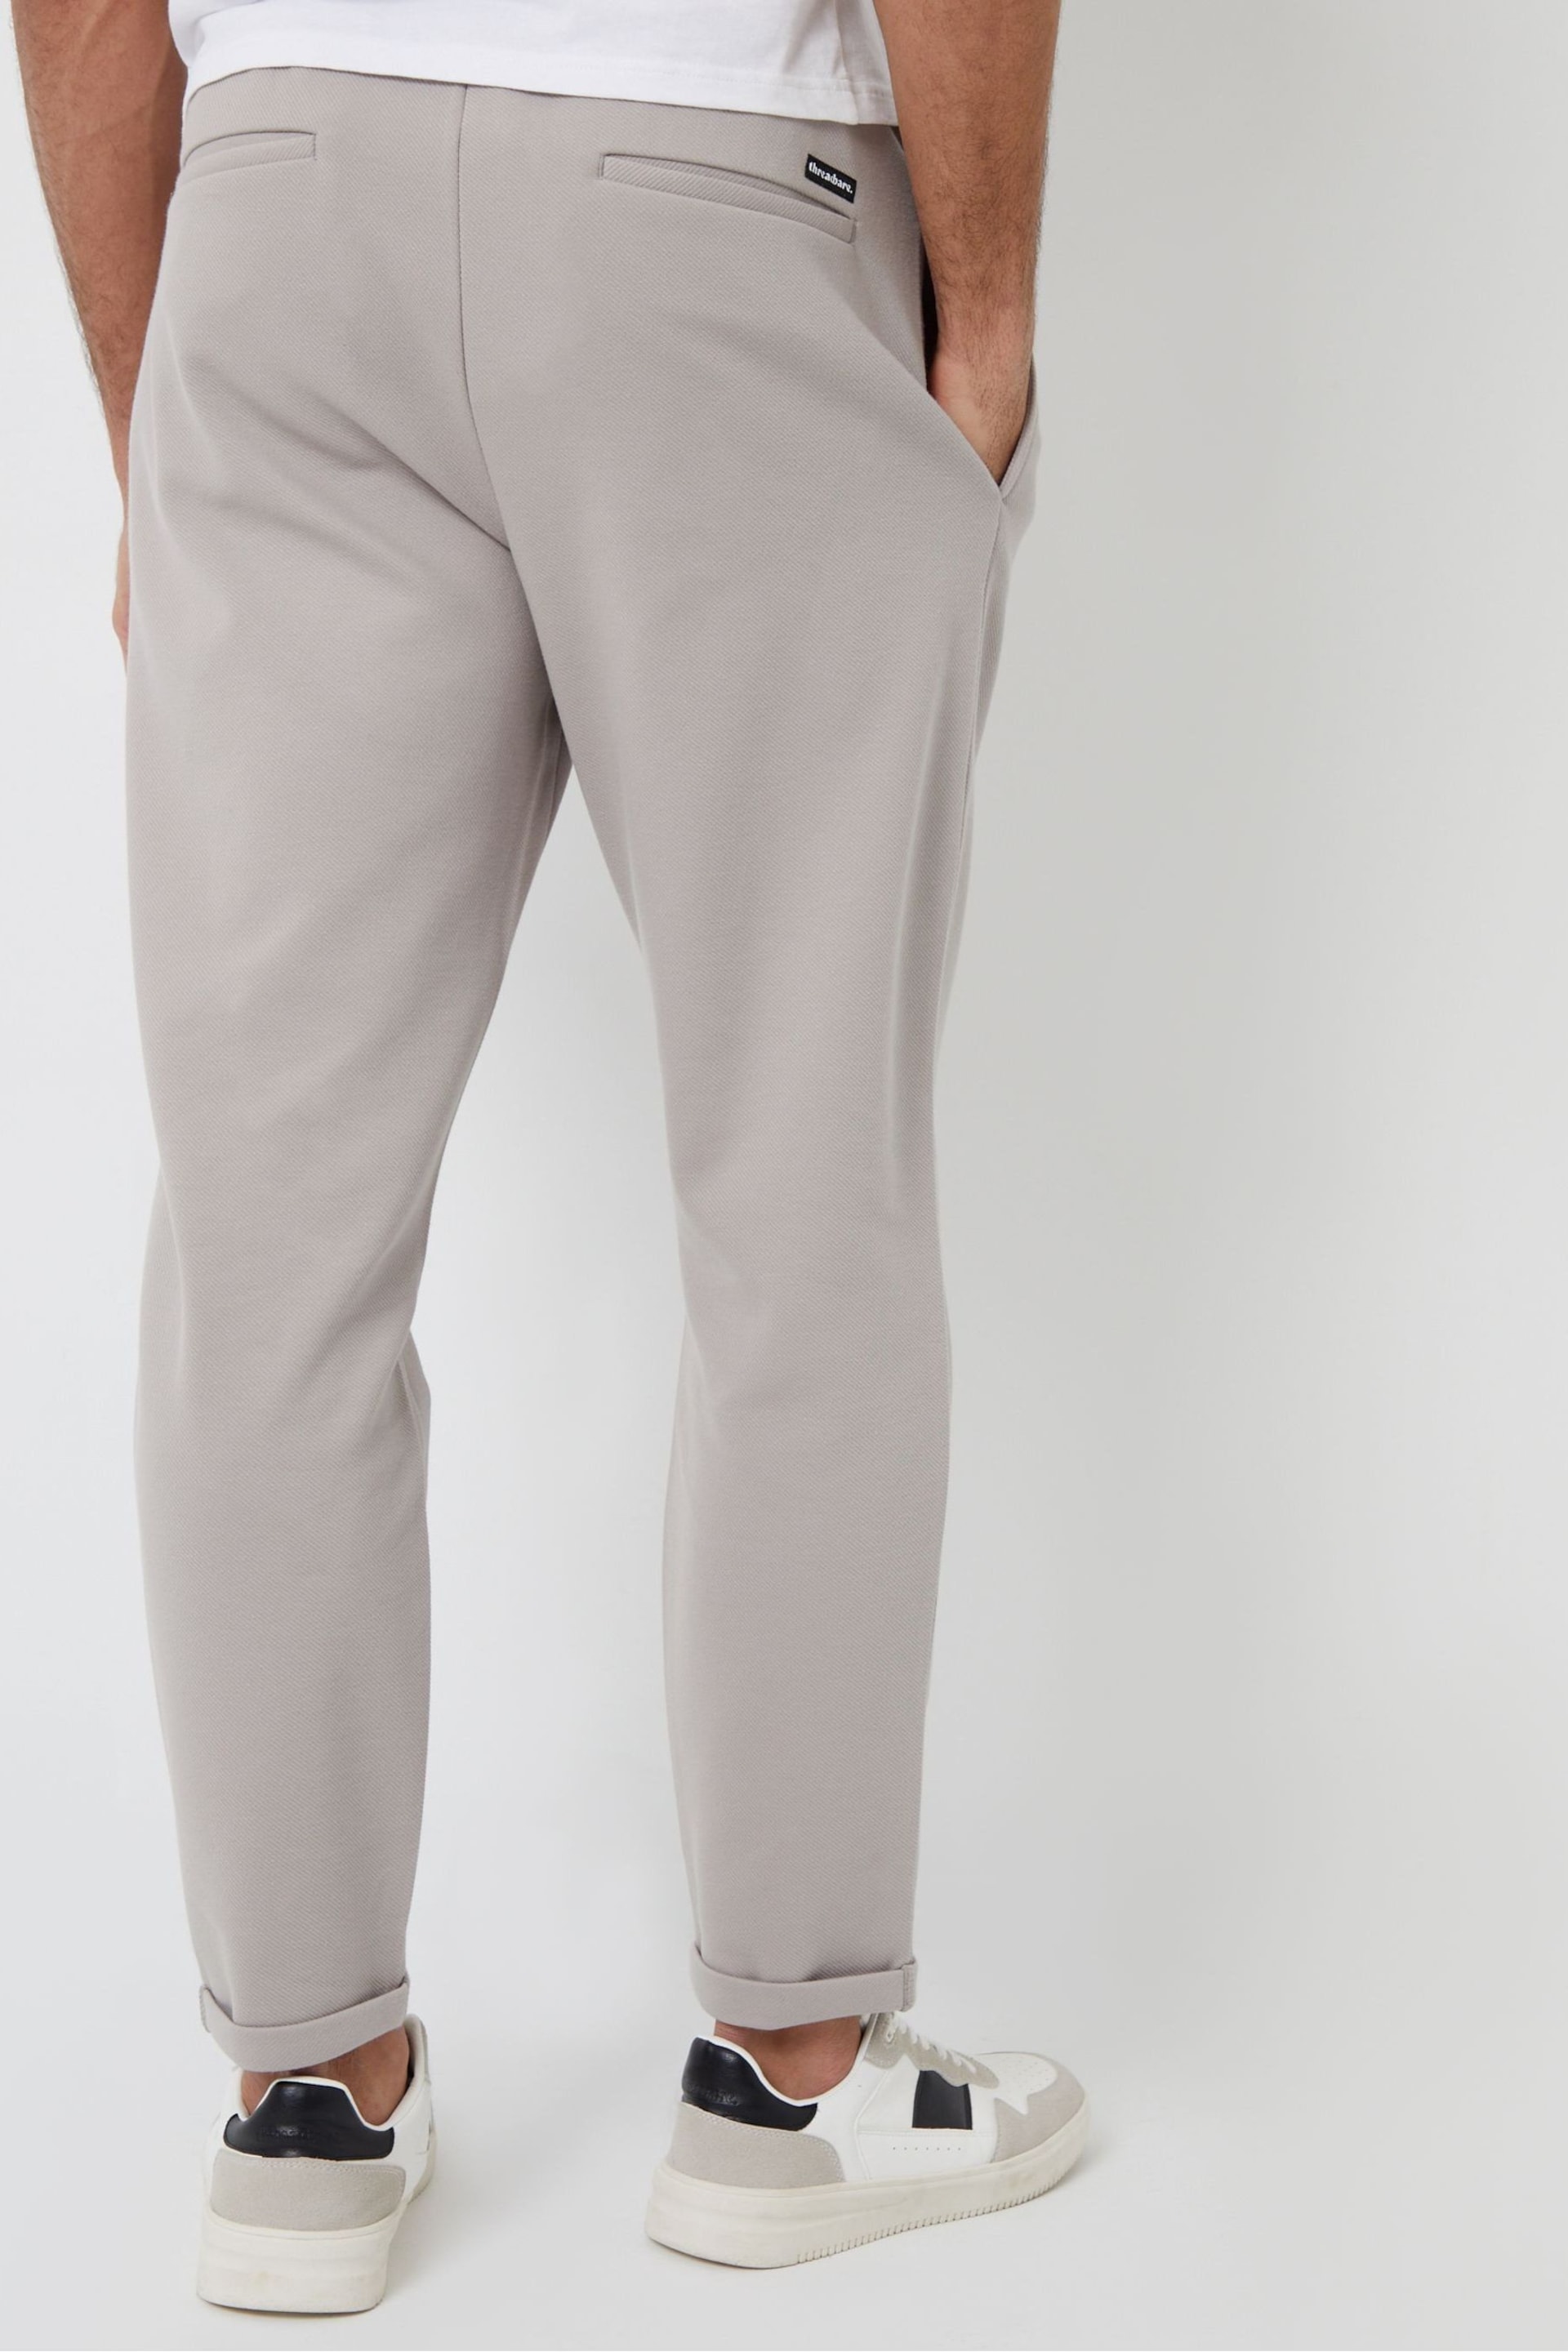 Threadbare Grey Luxe Jogger Style Joggers - Image 3 of 4